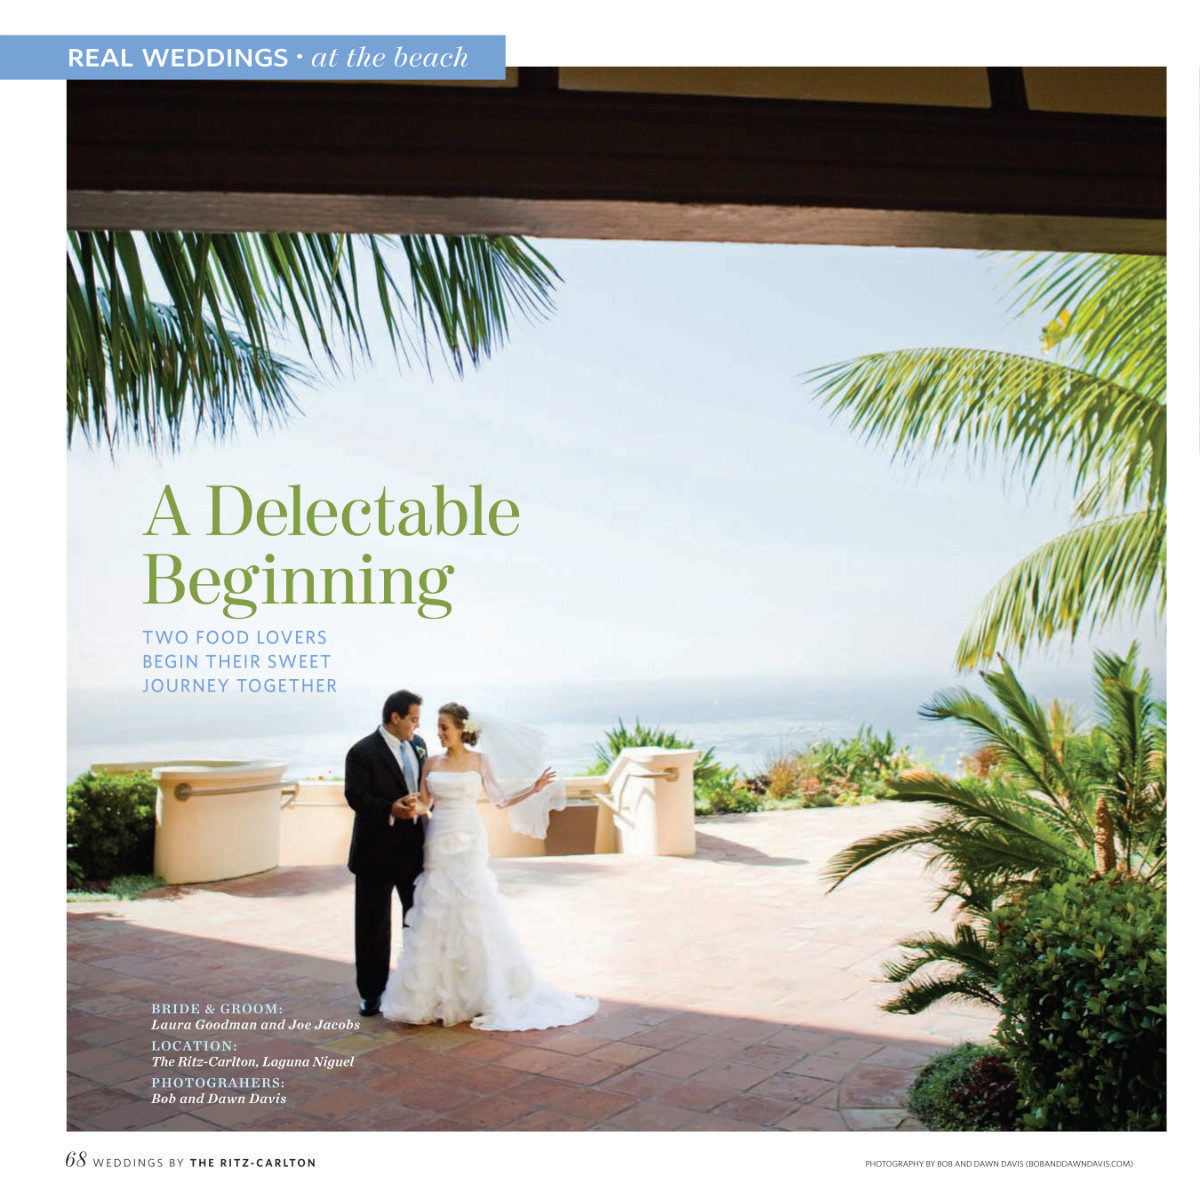 So excited to have Laura & Joe's wedding, designed by Lisa Vorce, featured in Weddings by Ritz-Carlton magazine in the July-December 2011 edition. Their wedding was incredibly beautiful on the coast of Dana Point, California at the The Ritz-Carlton, Laguna Niguel. Everything was perfect, right down to the sand dollars that wrapped the dinner menus, to the almond wedding cake with Bavarian chocolate and hazelnut crunch, sprinkled with brown sugar to resemble the beautiful sandy beaches. Simply magnificent and we wouldn't expect anything less from Laura and Joe.